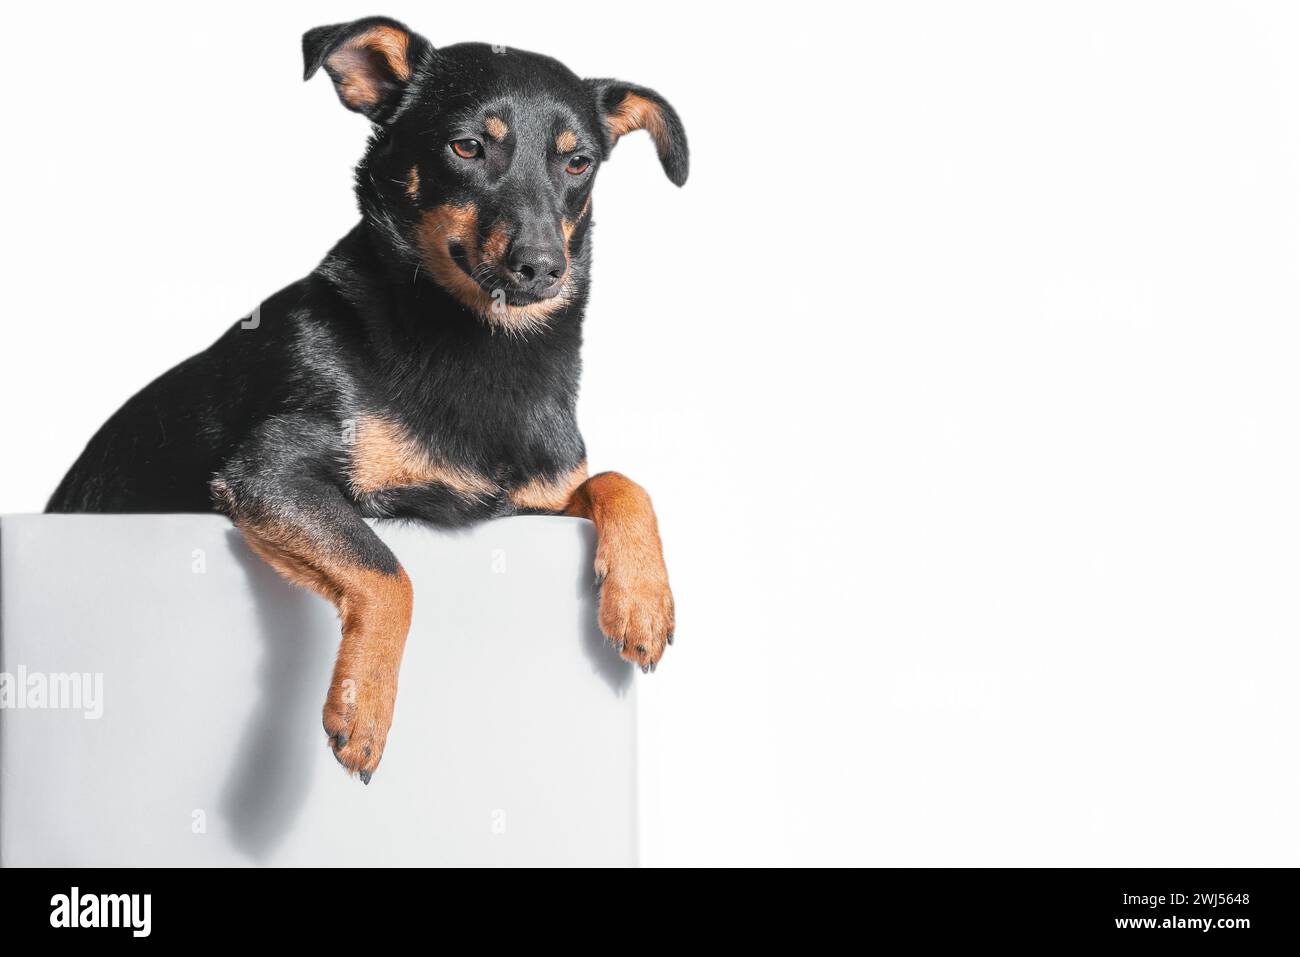 Mongrel dog of black and tan color looks out of a gray box on a white background Stock Photo